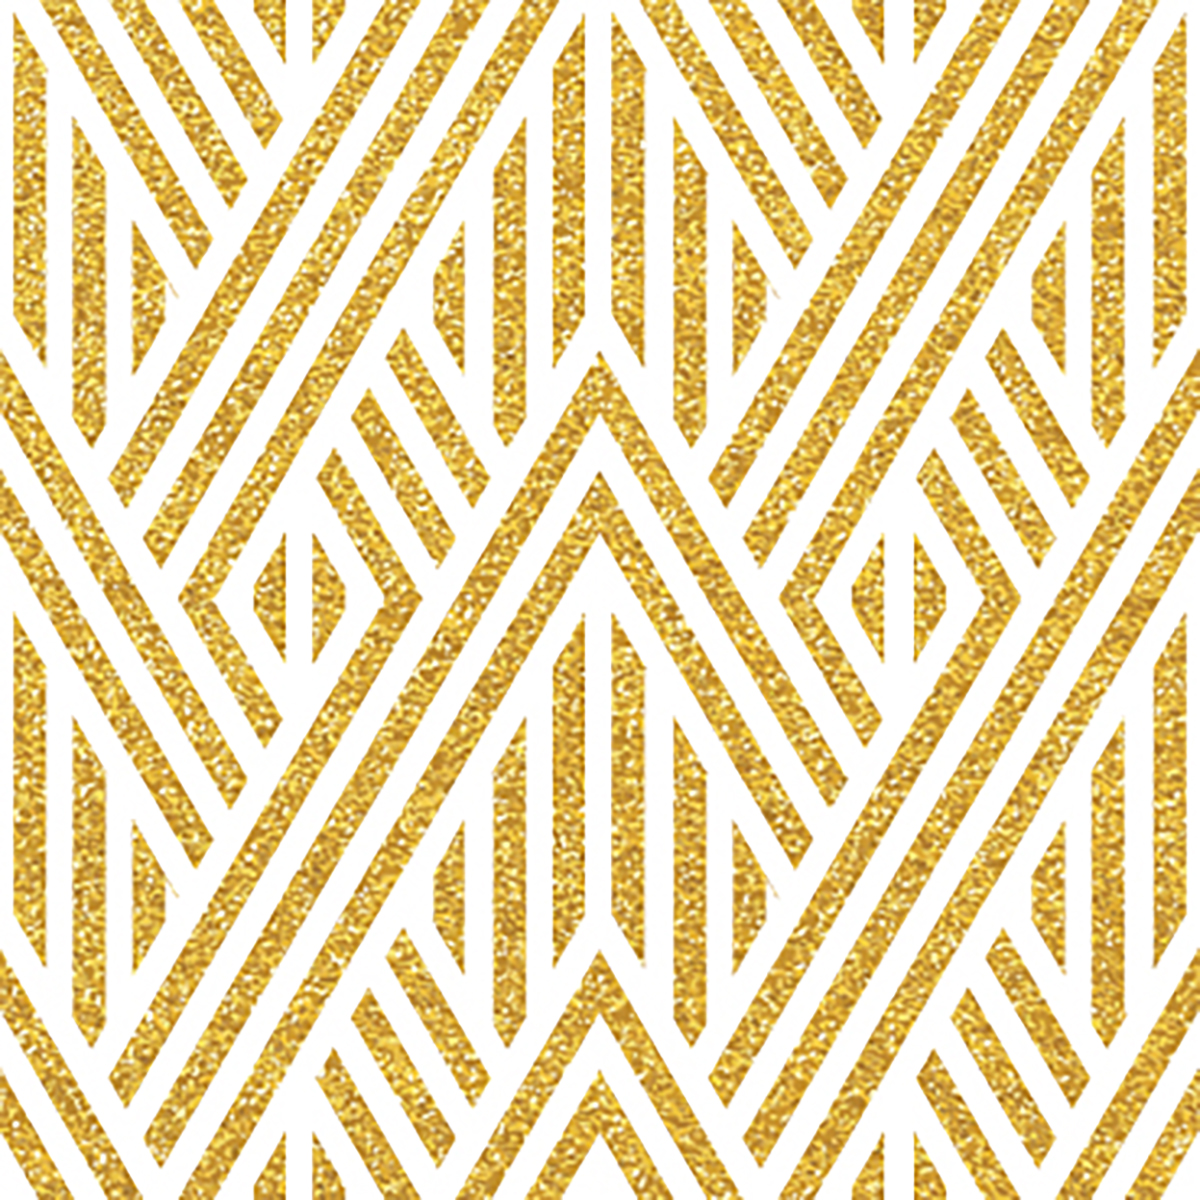 A pattern of gold and white lines